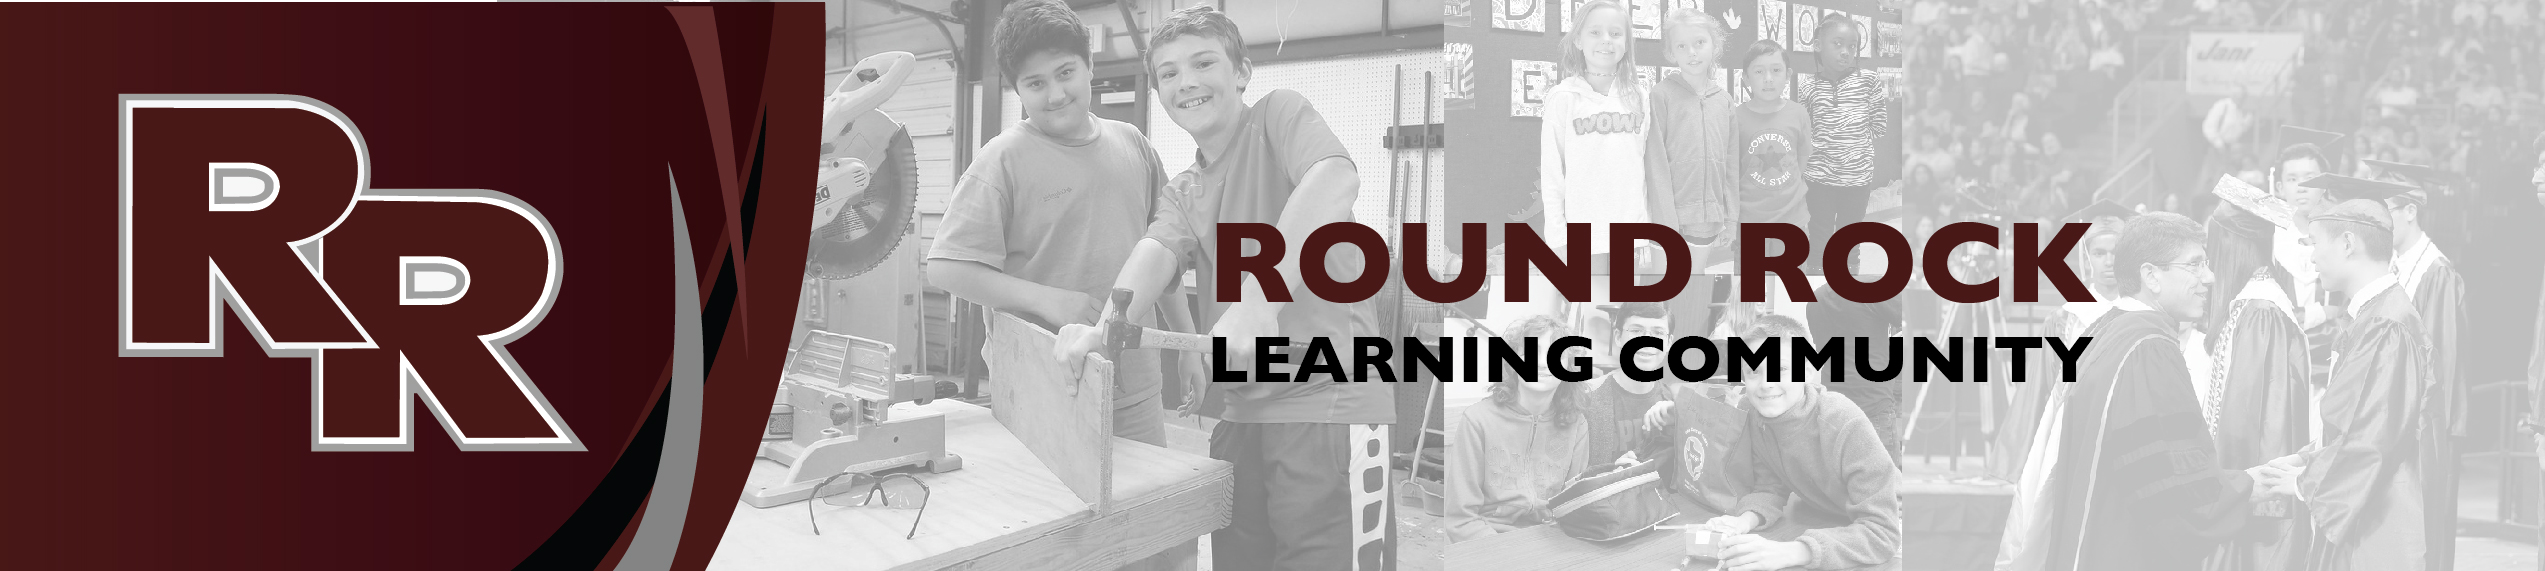 round rock learning community